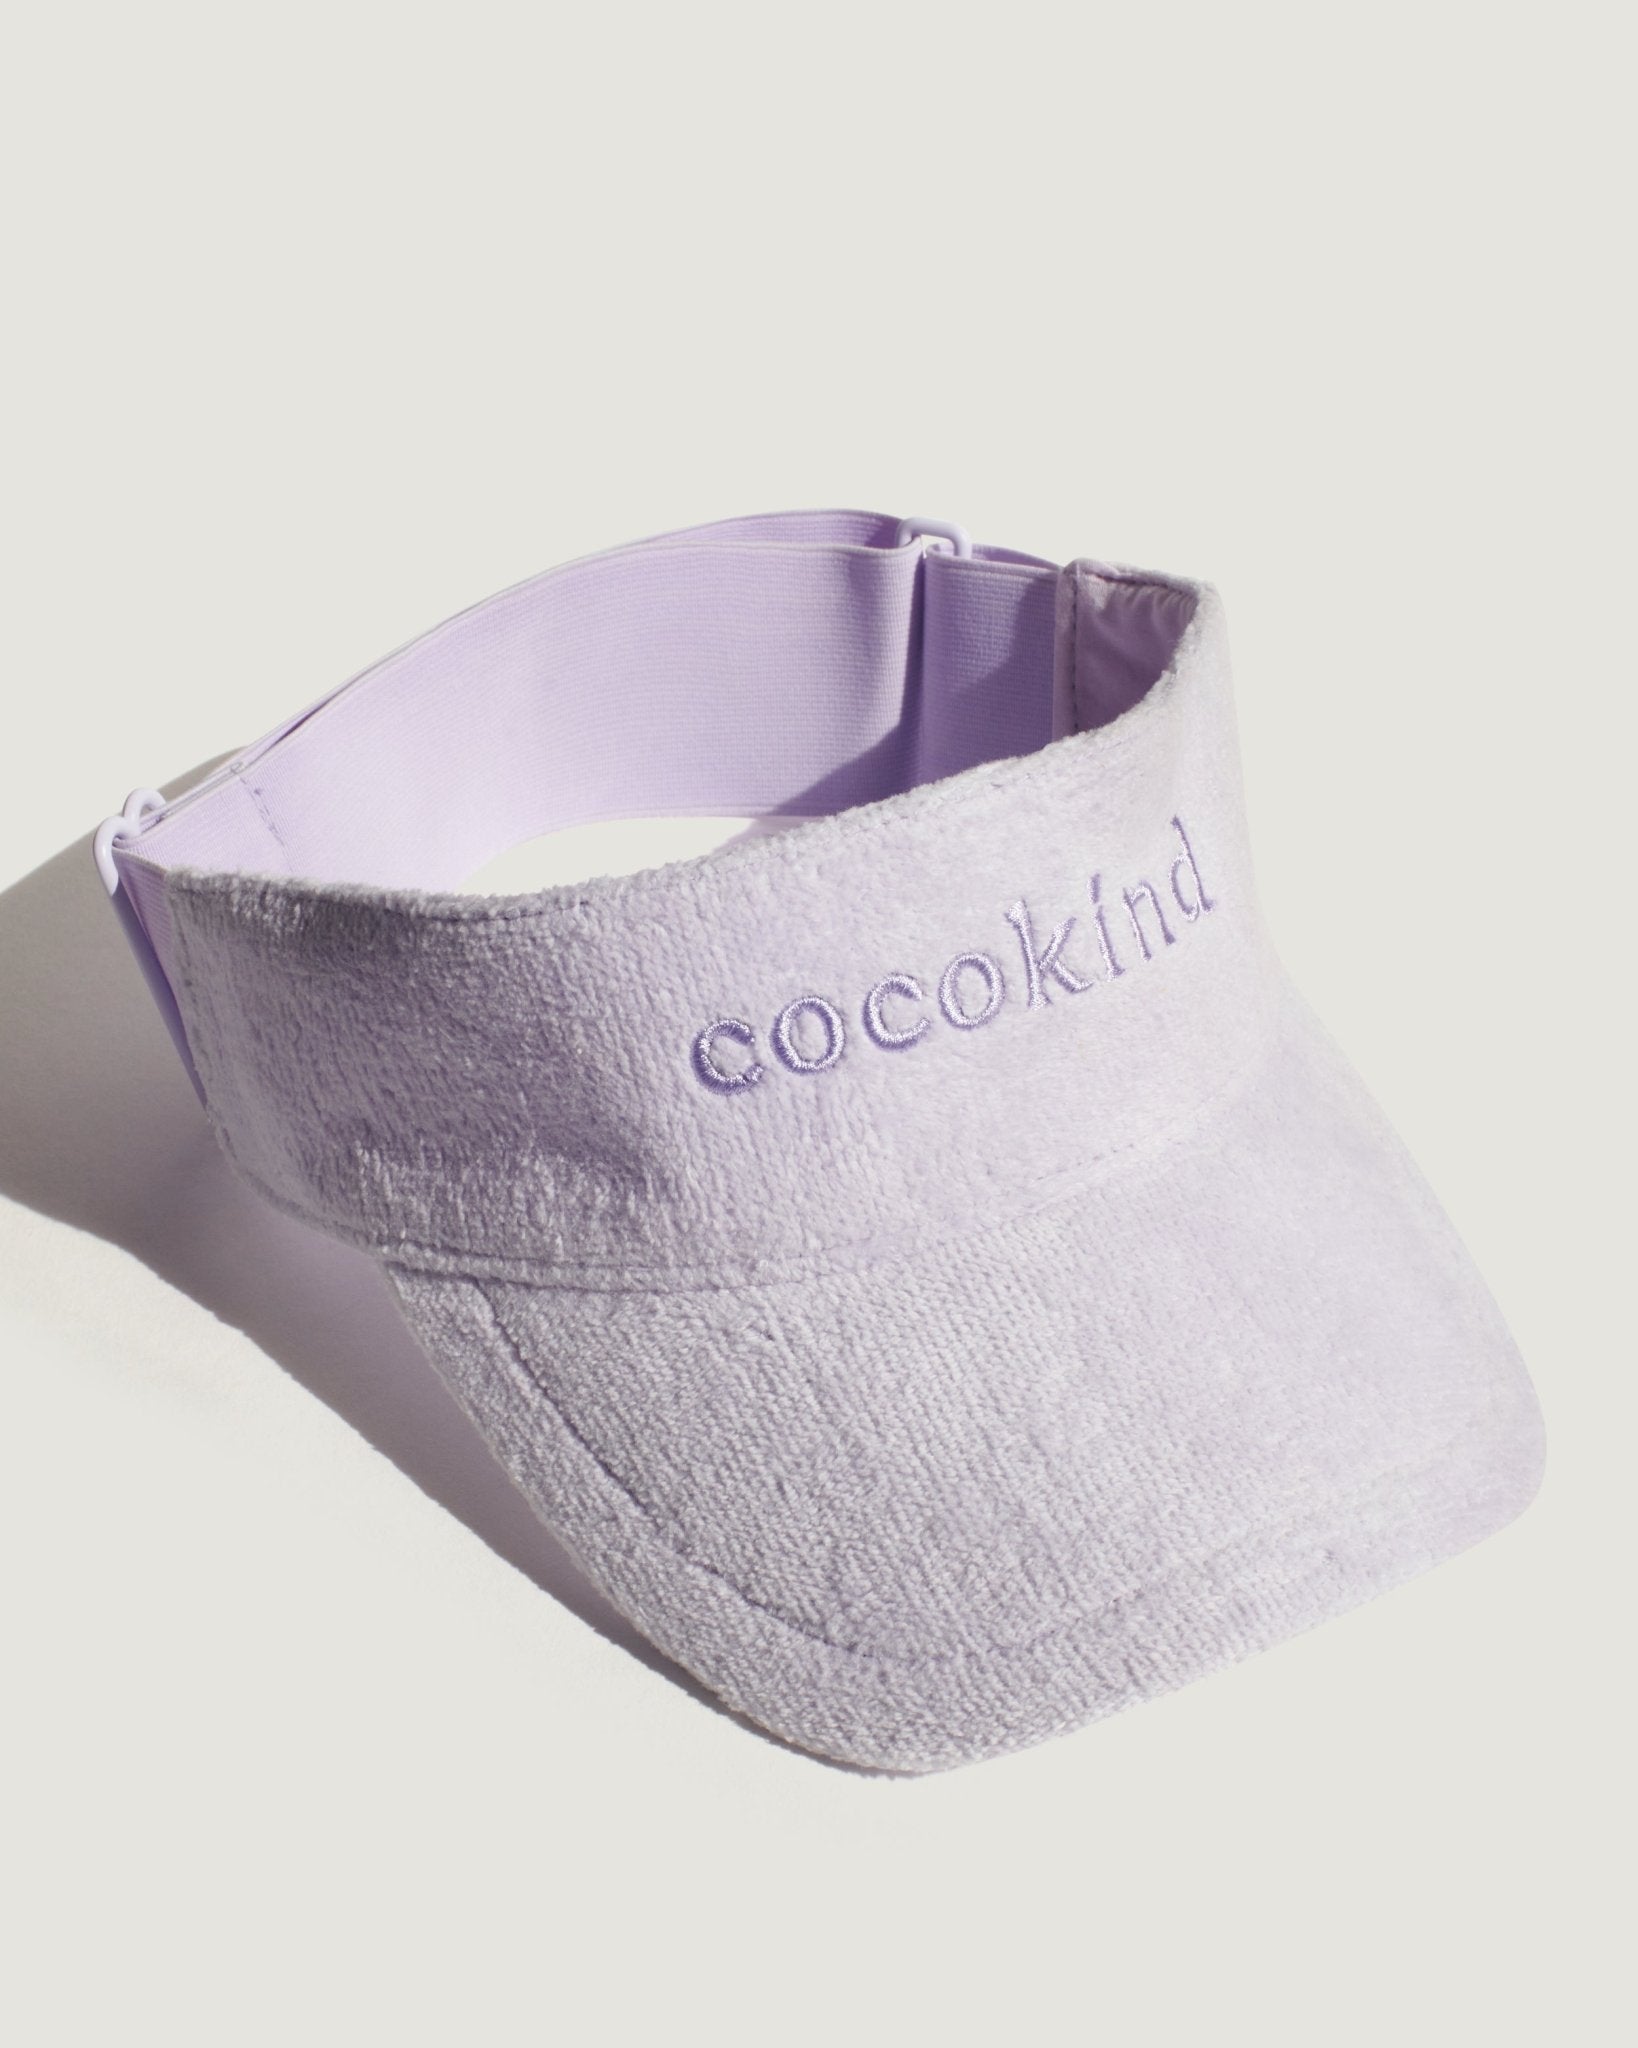 terry cloth visor - cocokind